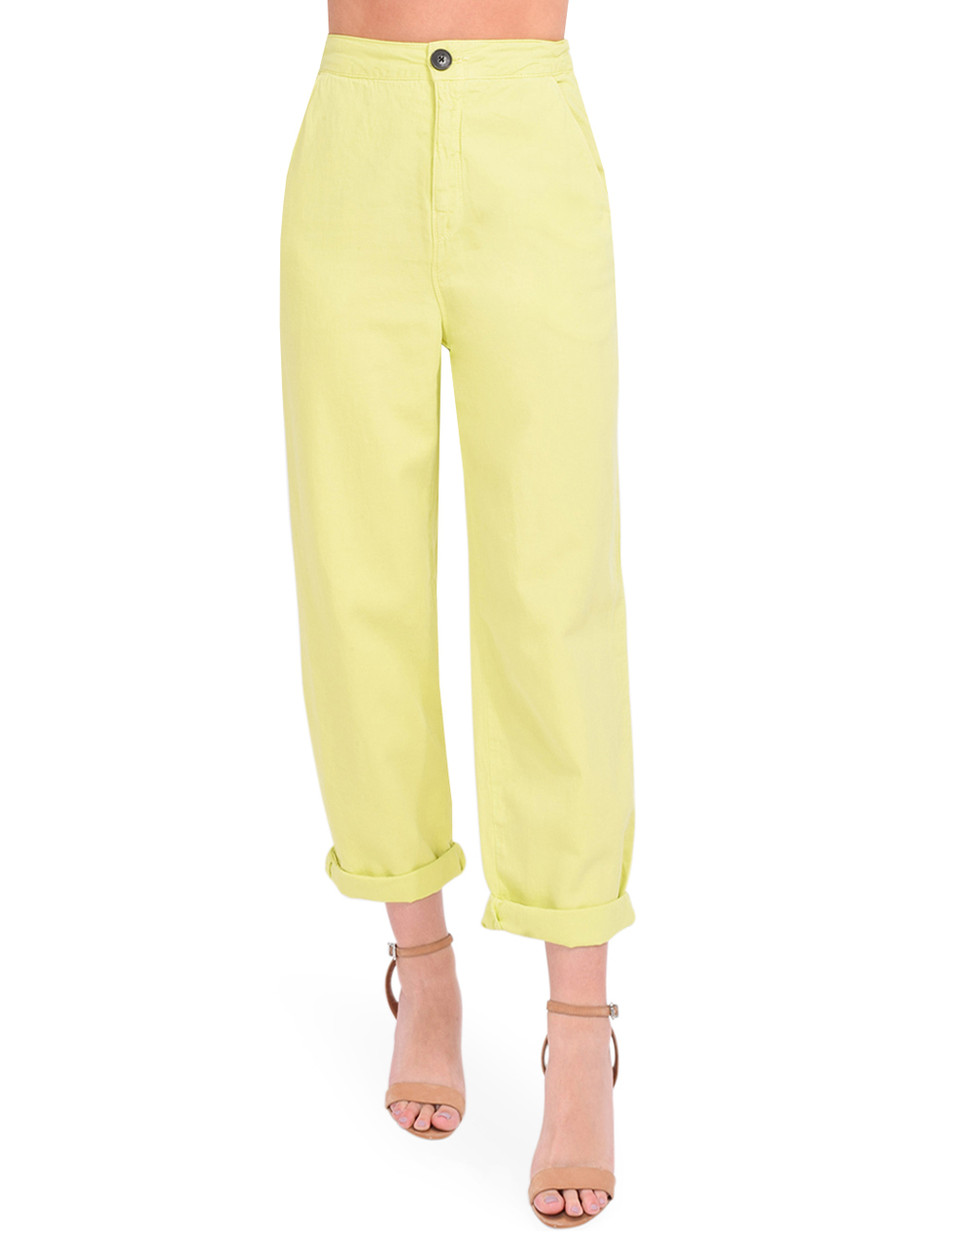 Elastic waist trousers, multi-pockets: two side pockets on legs Yellow